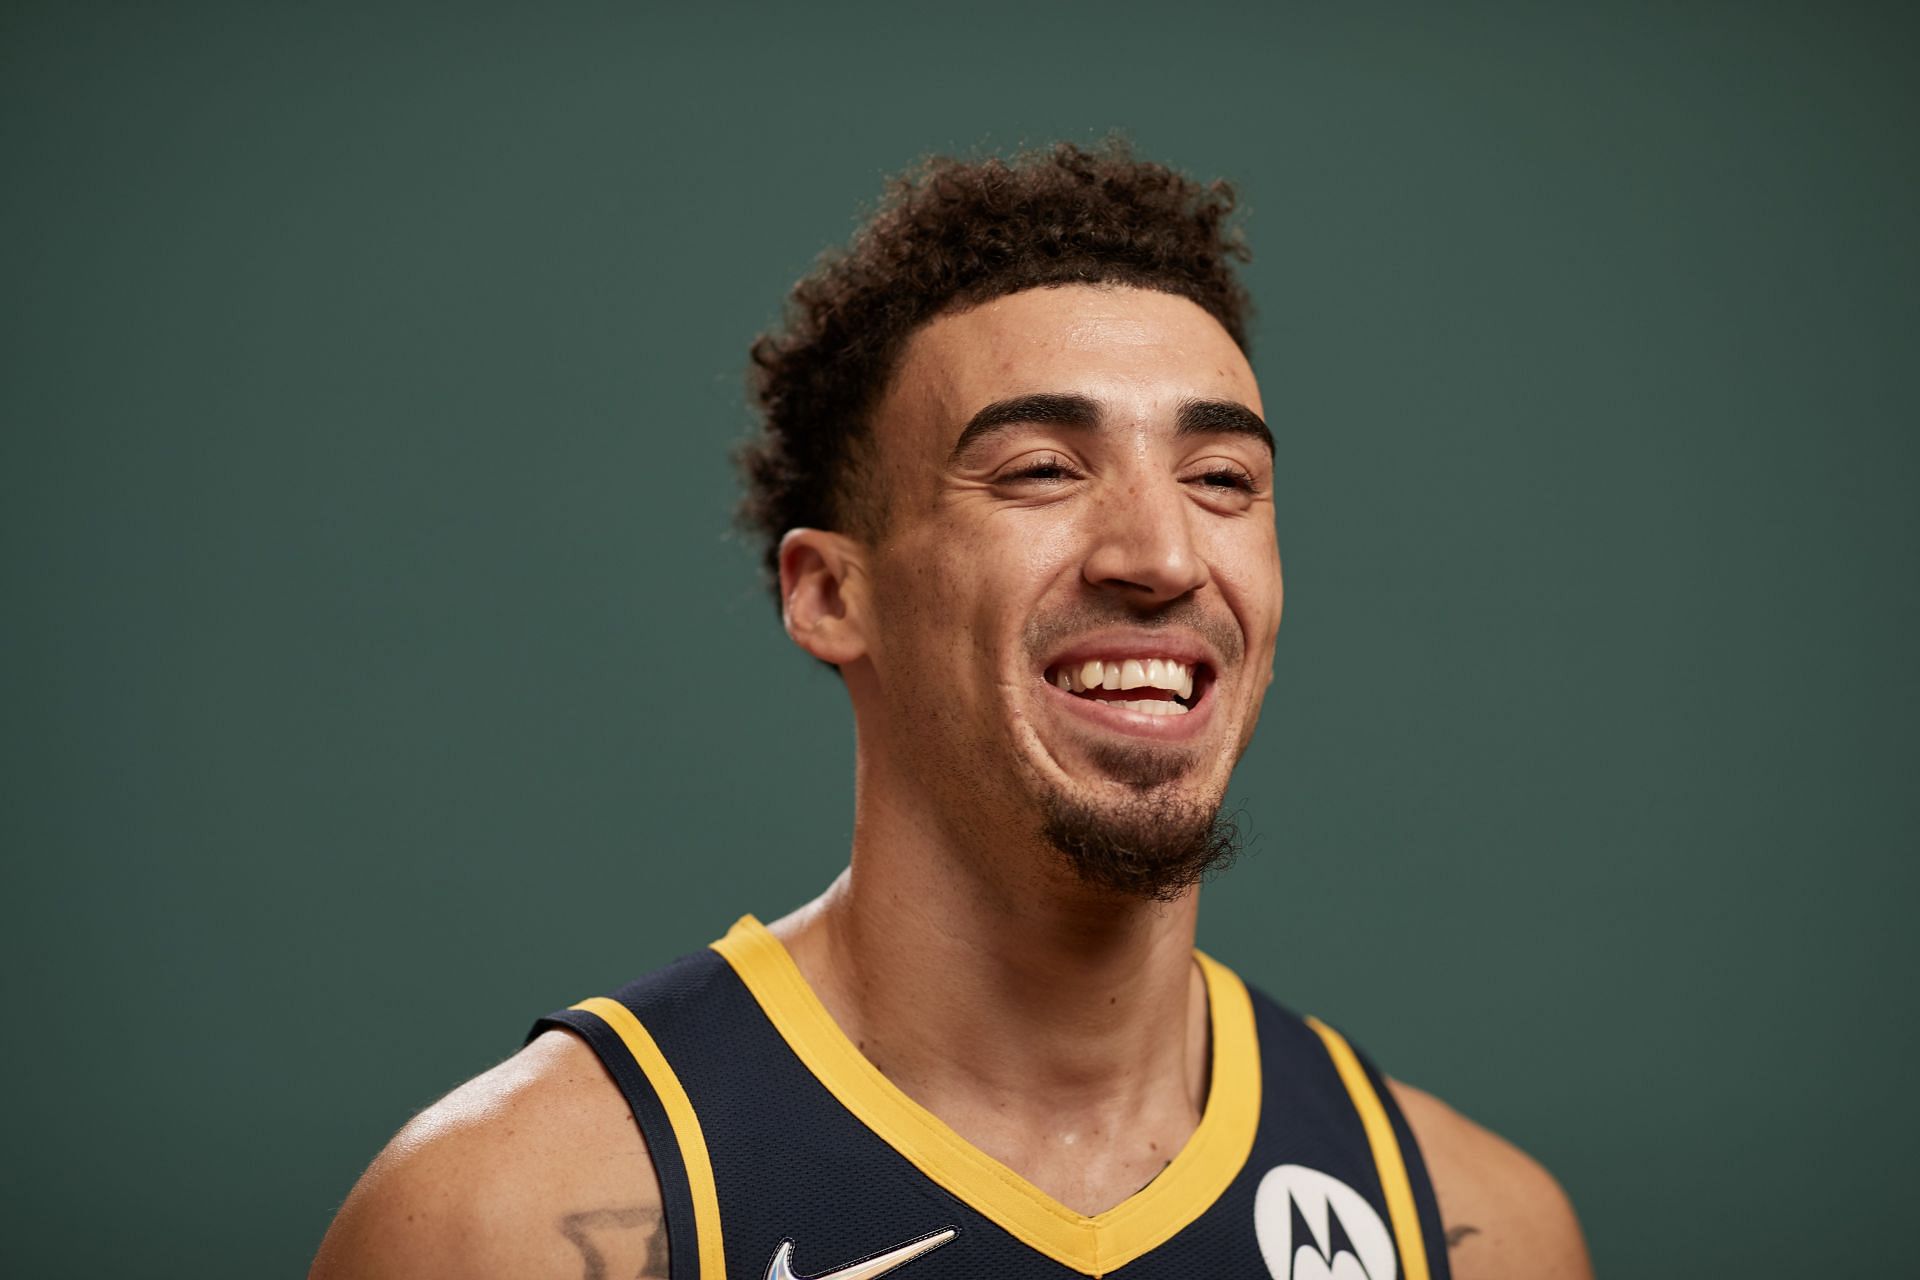 Chris Duarte #3 of the Indiana Pacers poses for a photo during the 2021 NBA Rookie Photo Shoot on August 15, 2021 in Las Vegas, Nevada.